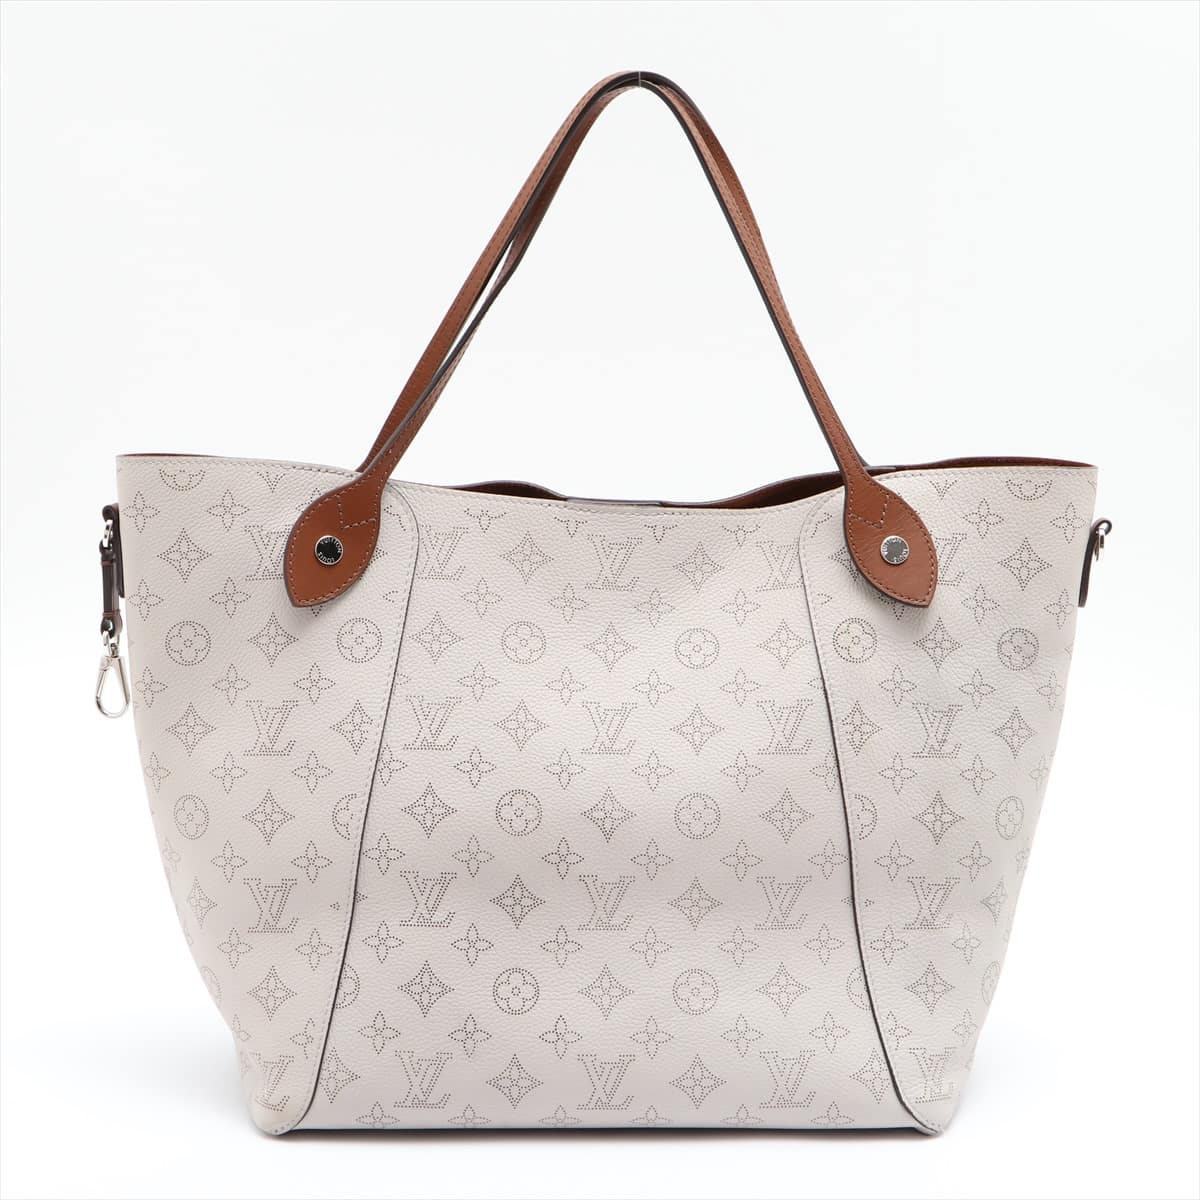 Louis Vuitton Mahina Hina MM M55552 Comes with pouch, slight cigarette smell